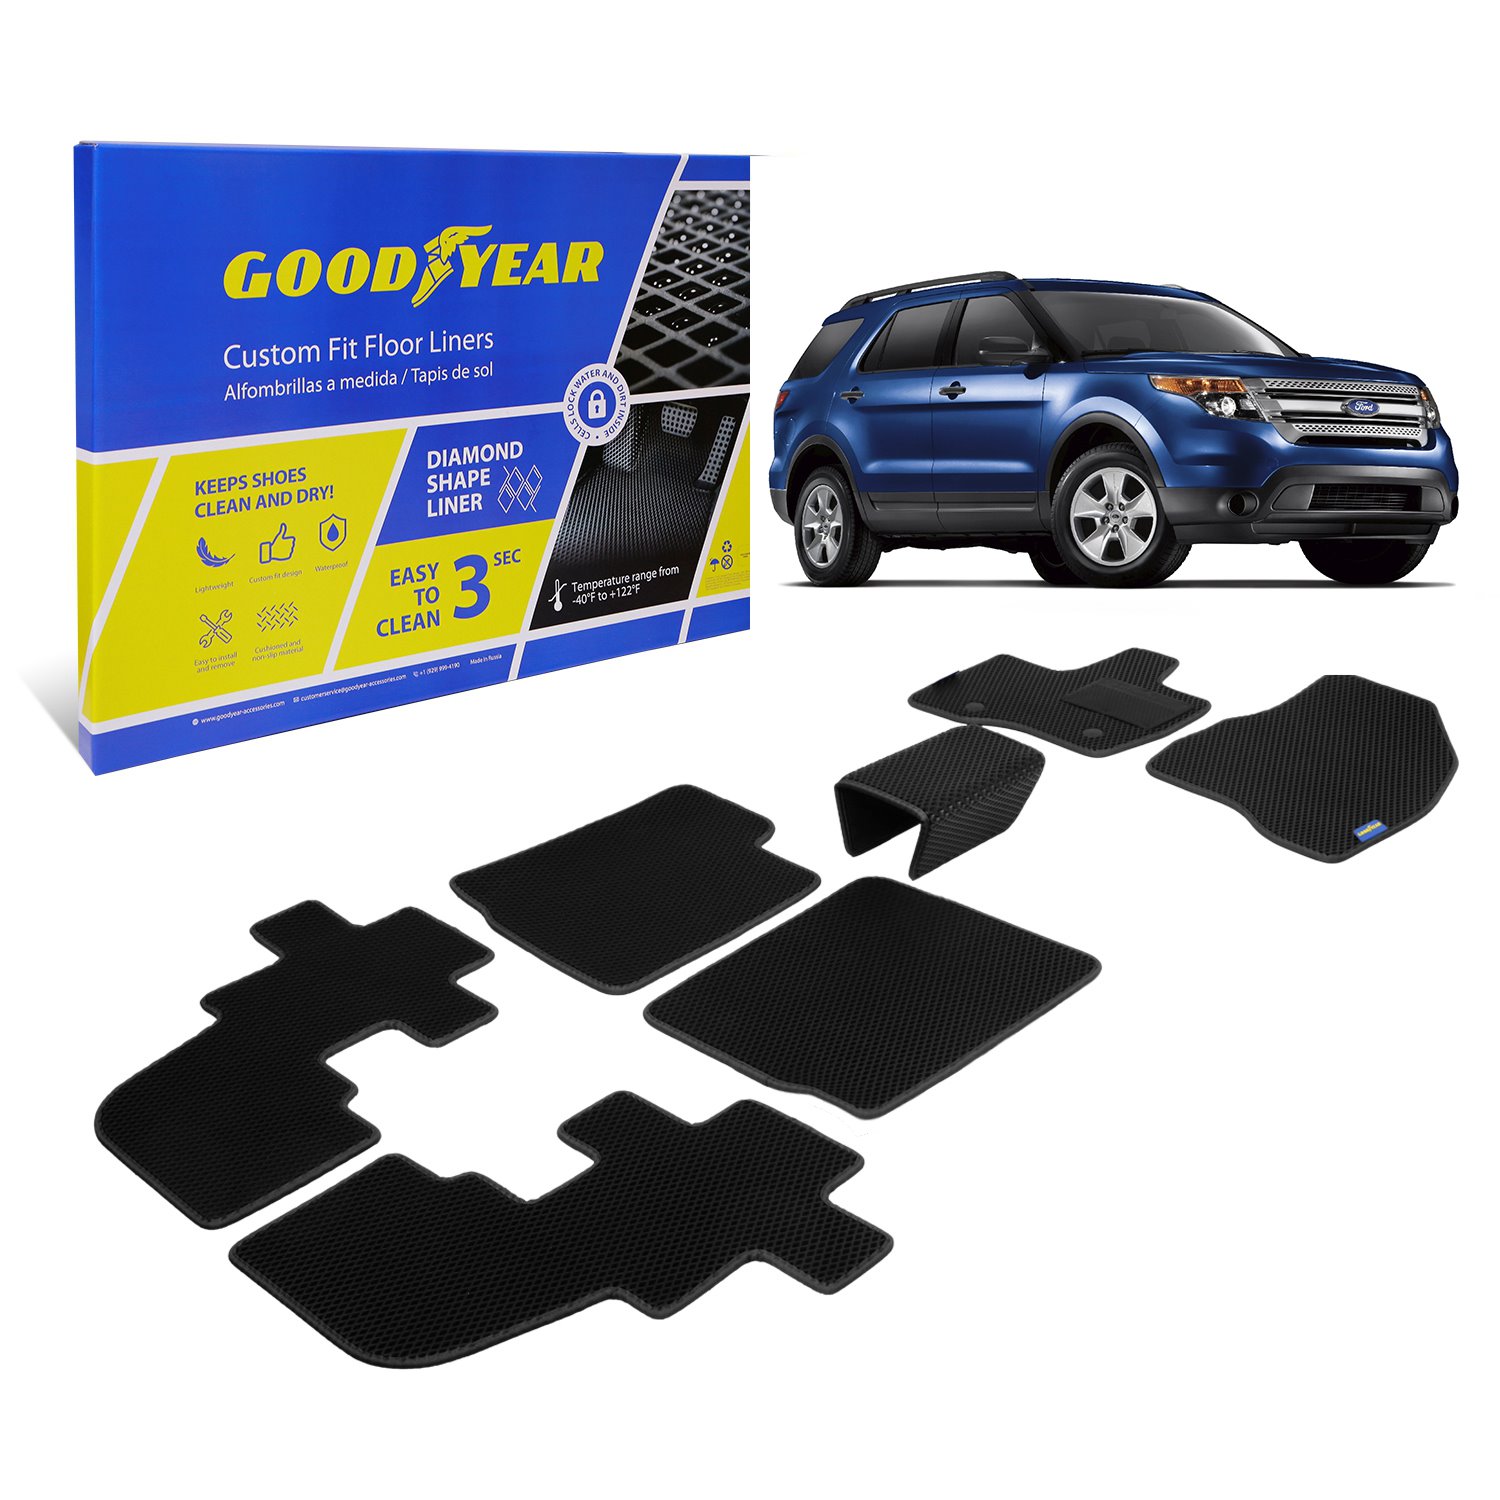 Goodyear Custom-Fit Floor Liners for 2011-2014 Ford Explorer